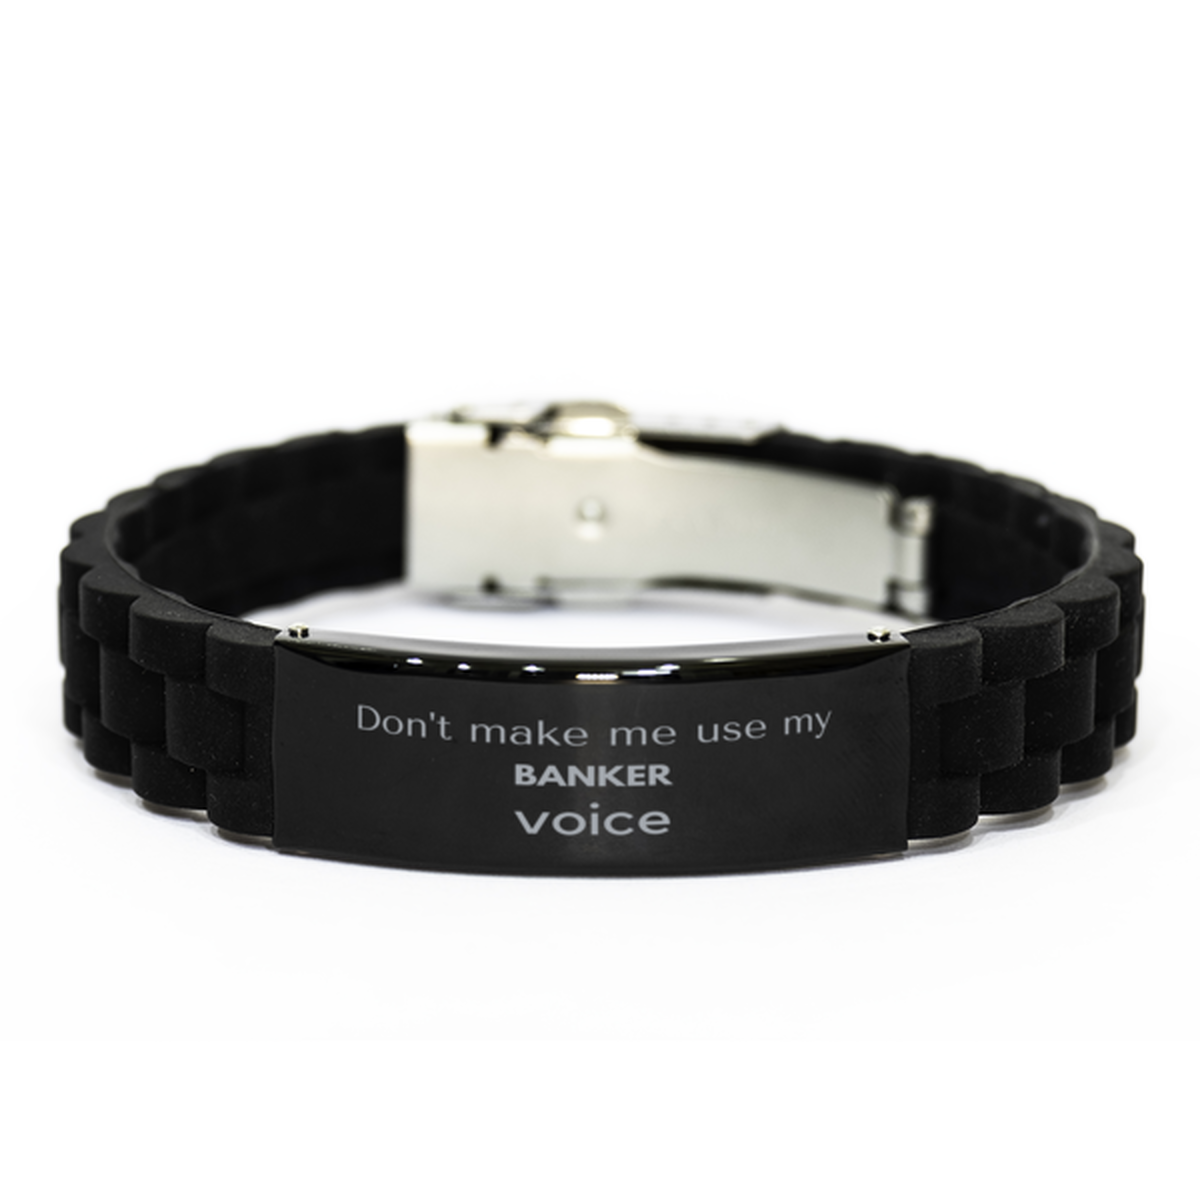 Don't make me use my Banker voice, Sarcasm Banker Gifts, Christmas Banker Black Glidelock Clasp Bracelet Birthday Unique Gifts For Banker Coworkers, Men, Women, Colleague, Friends